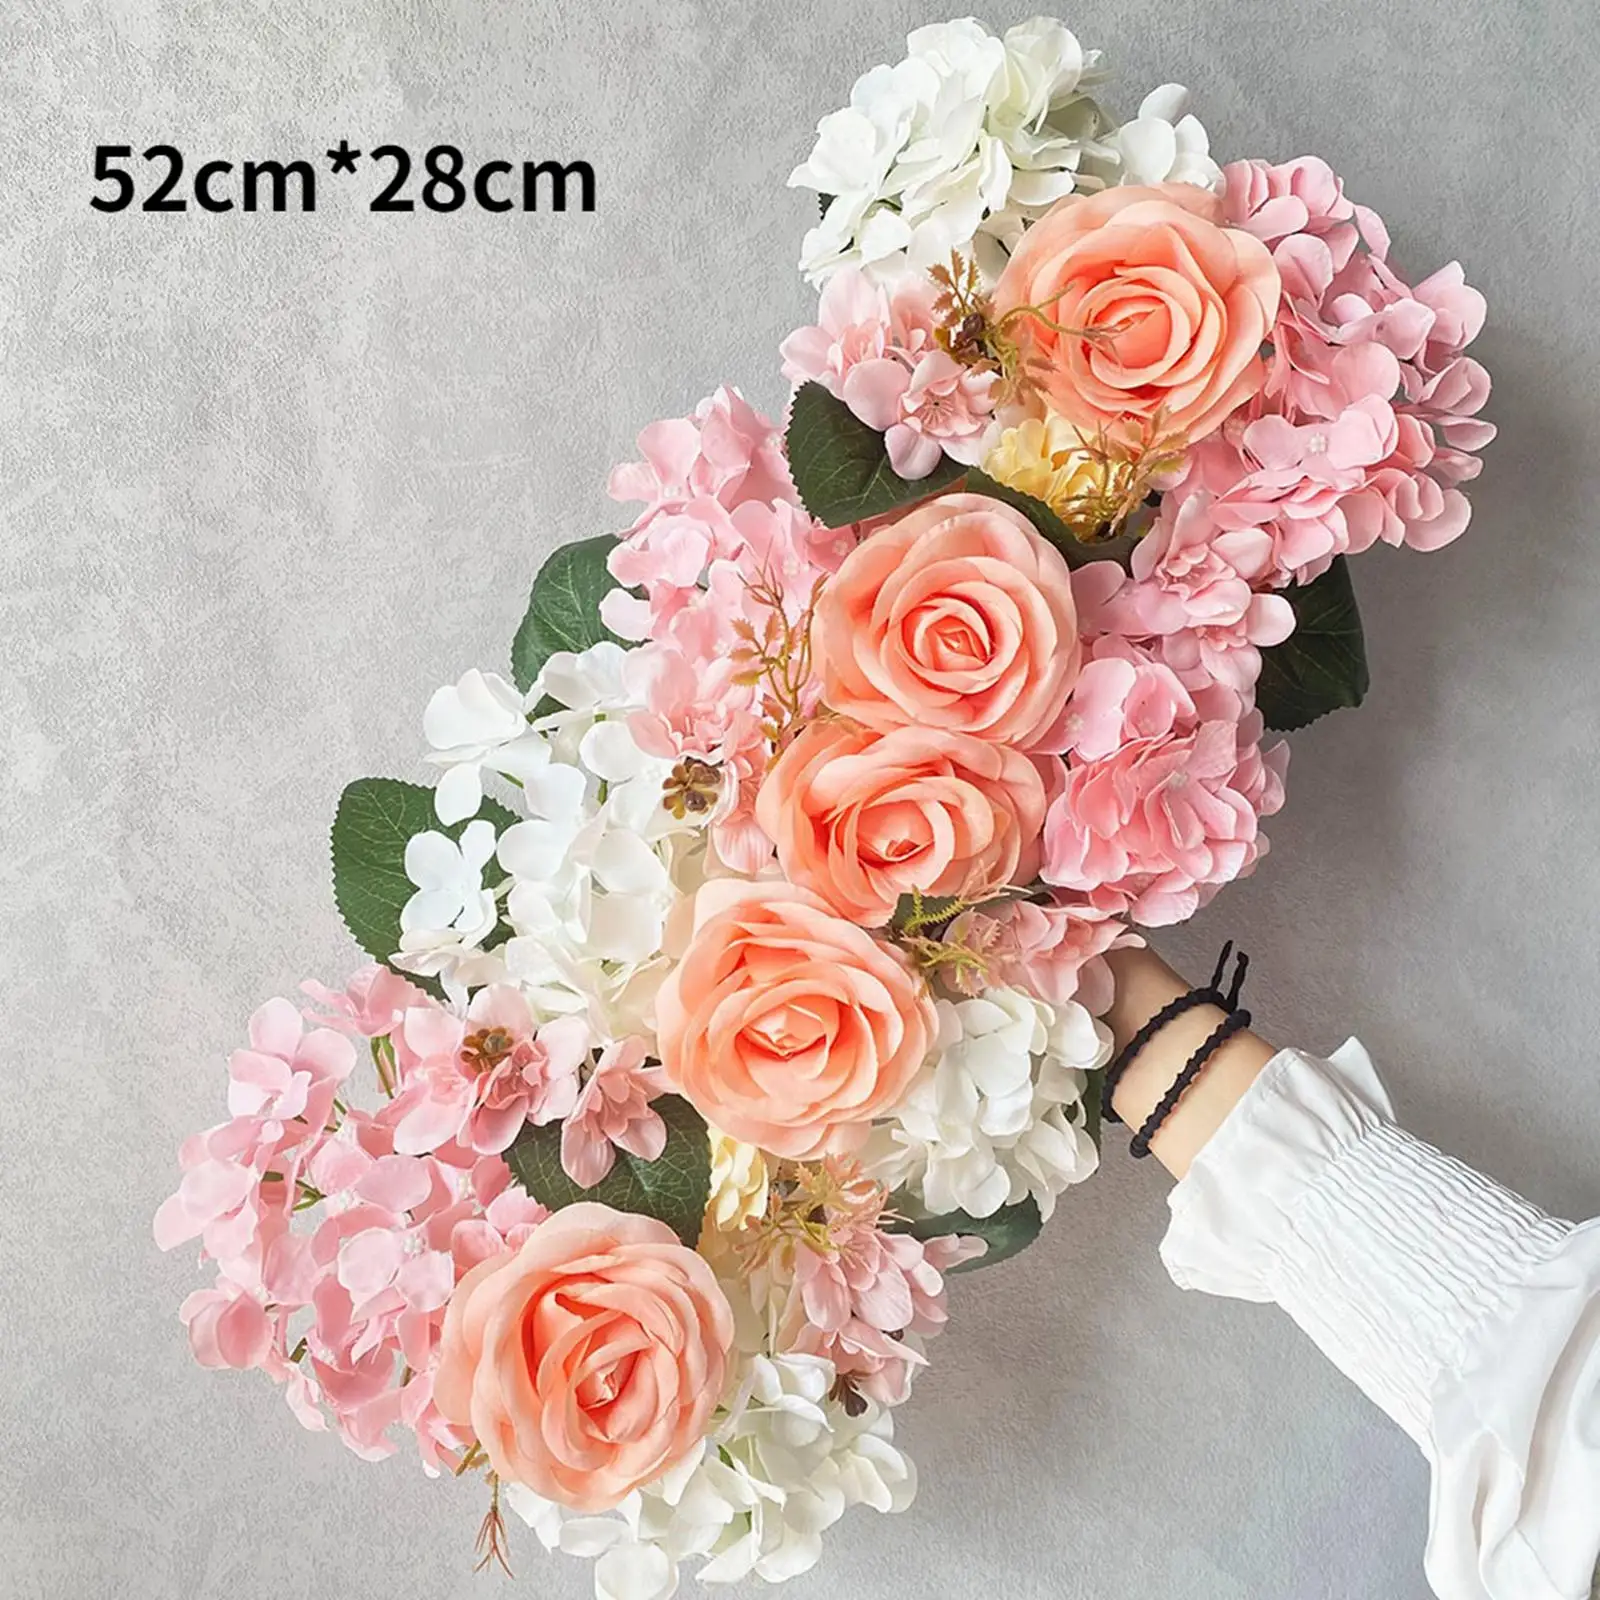 Decorative Flower Panel for Flower Wall, Artificial Flowers for Wall Decor,